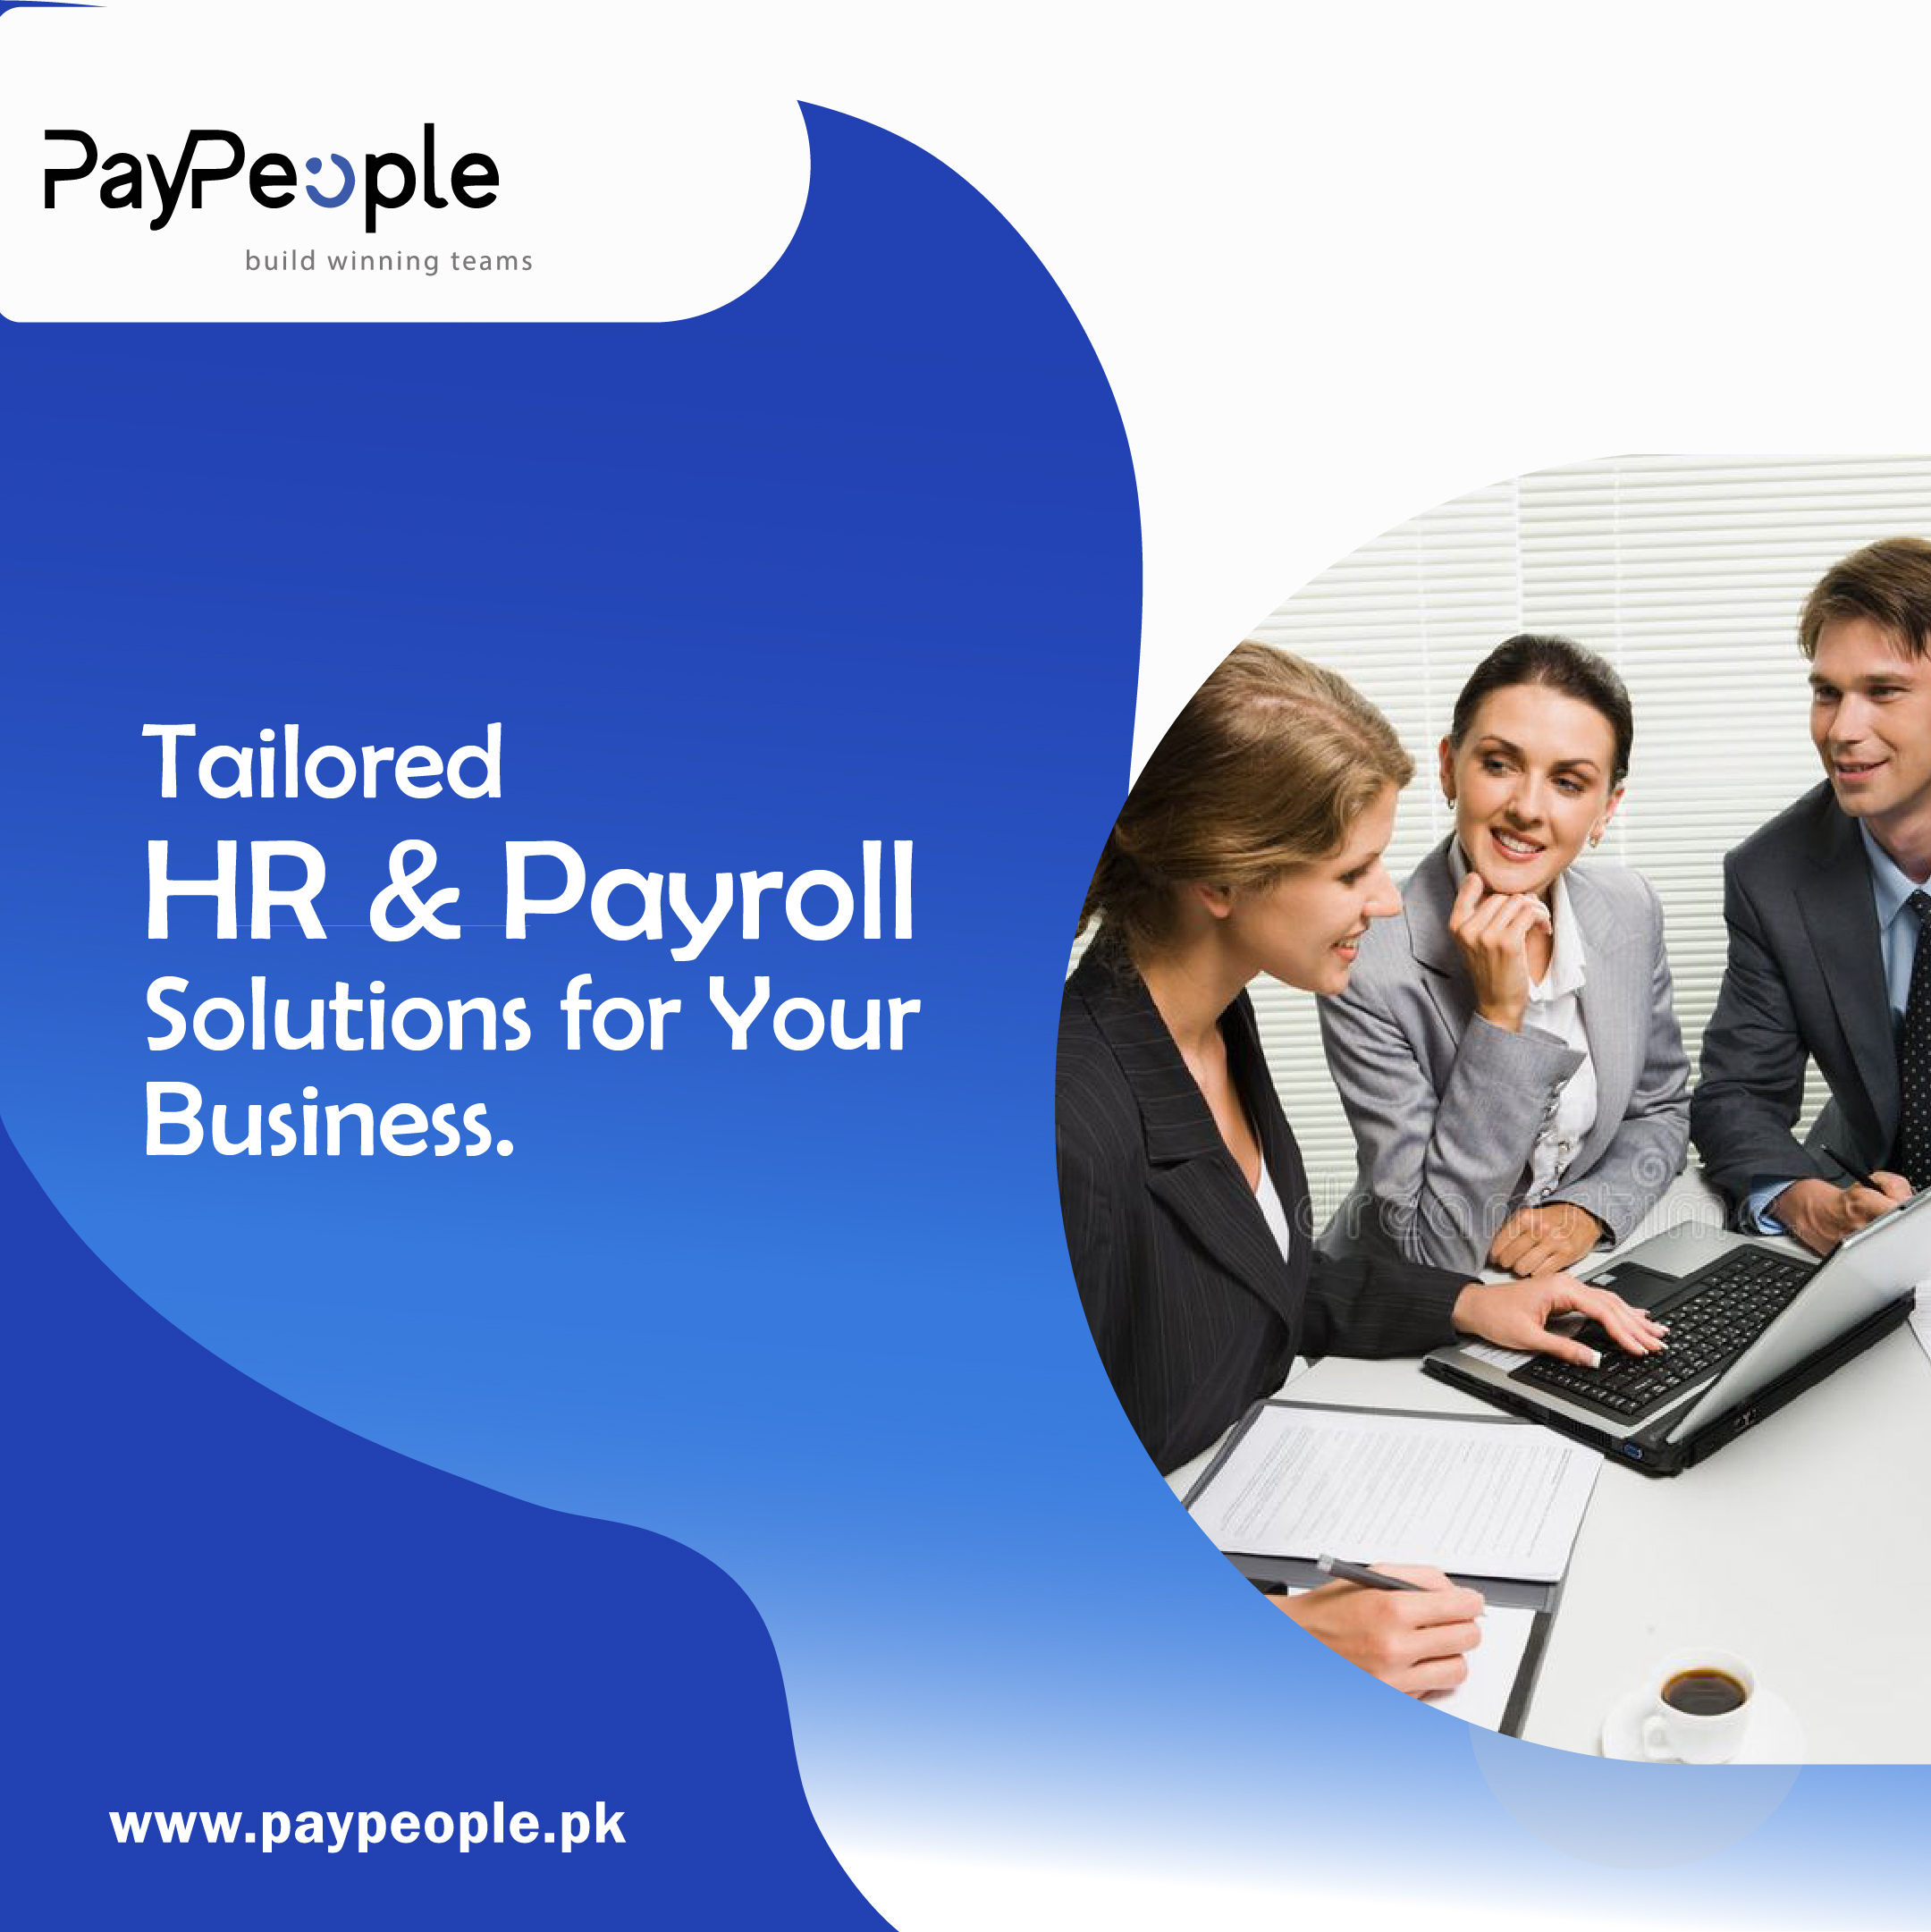 What analytics capabilities are available HR Software in Pakistan?